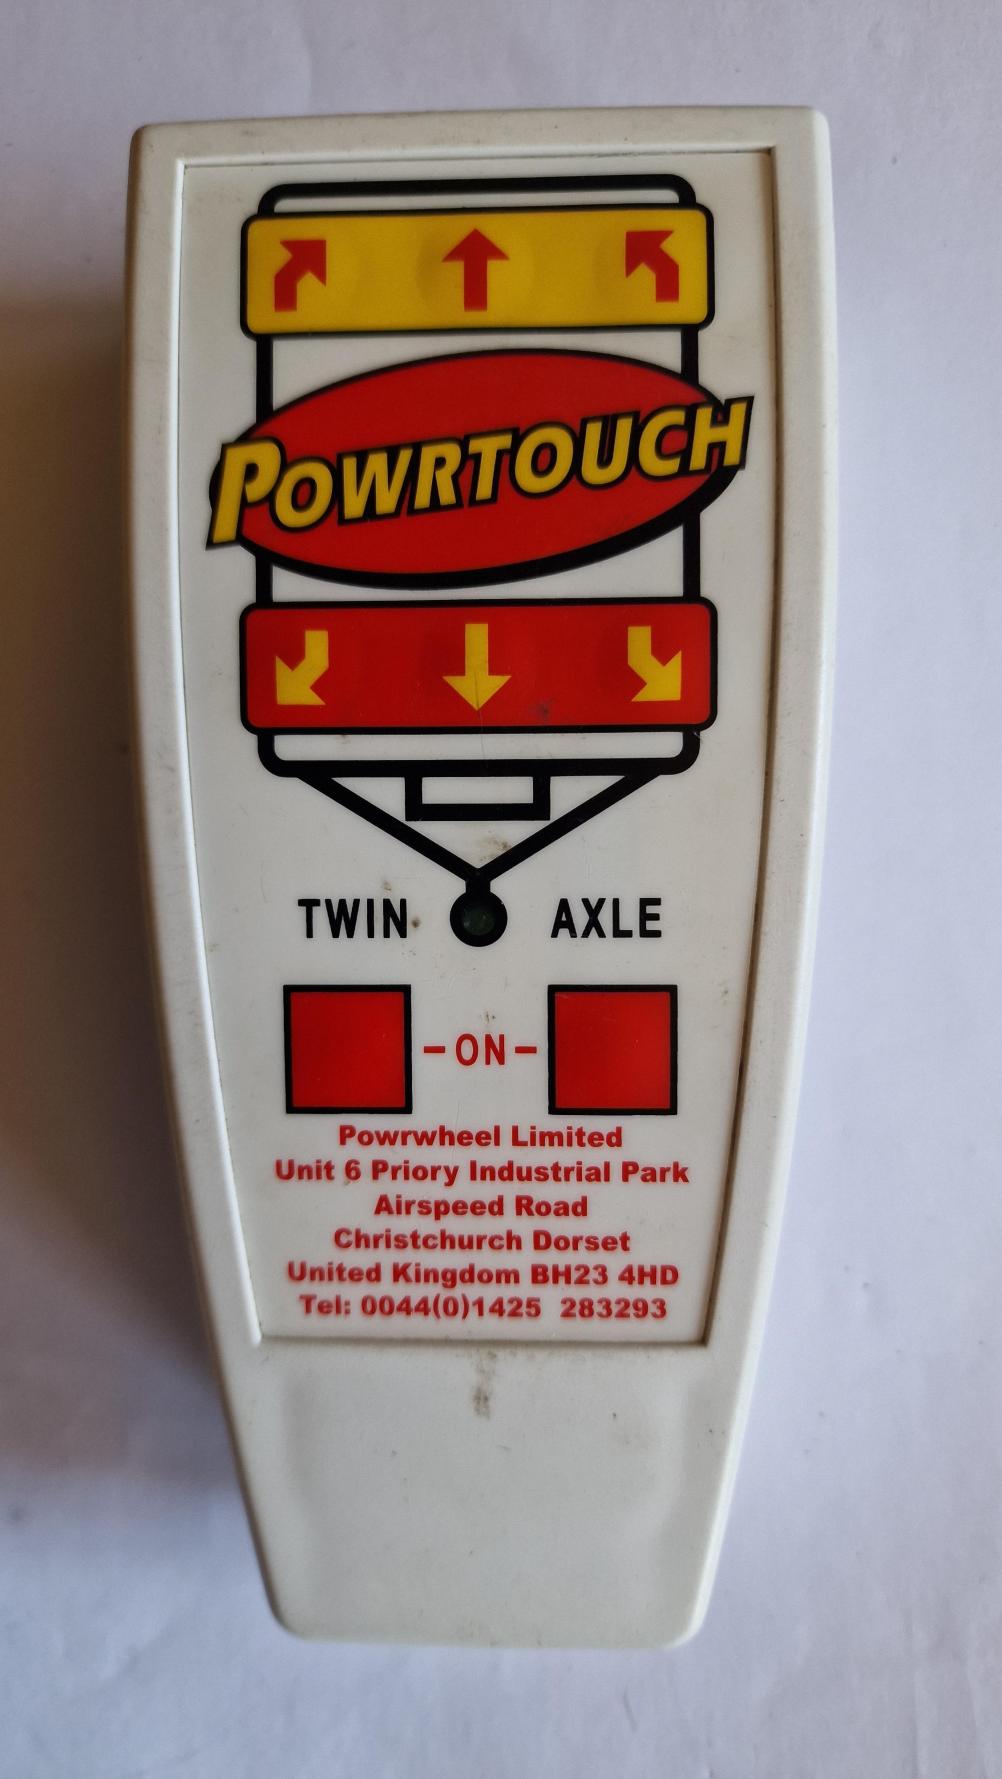 Powrtouch  Remote Control - Front Image